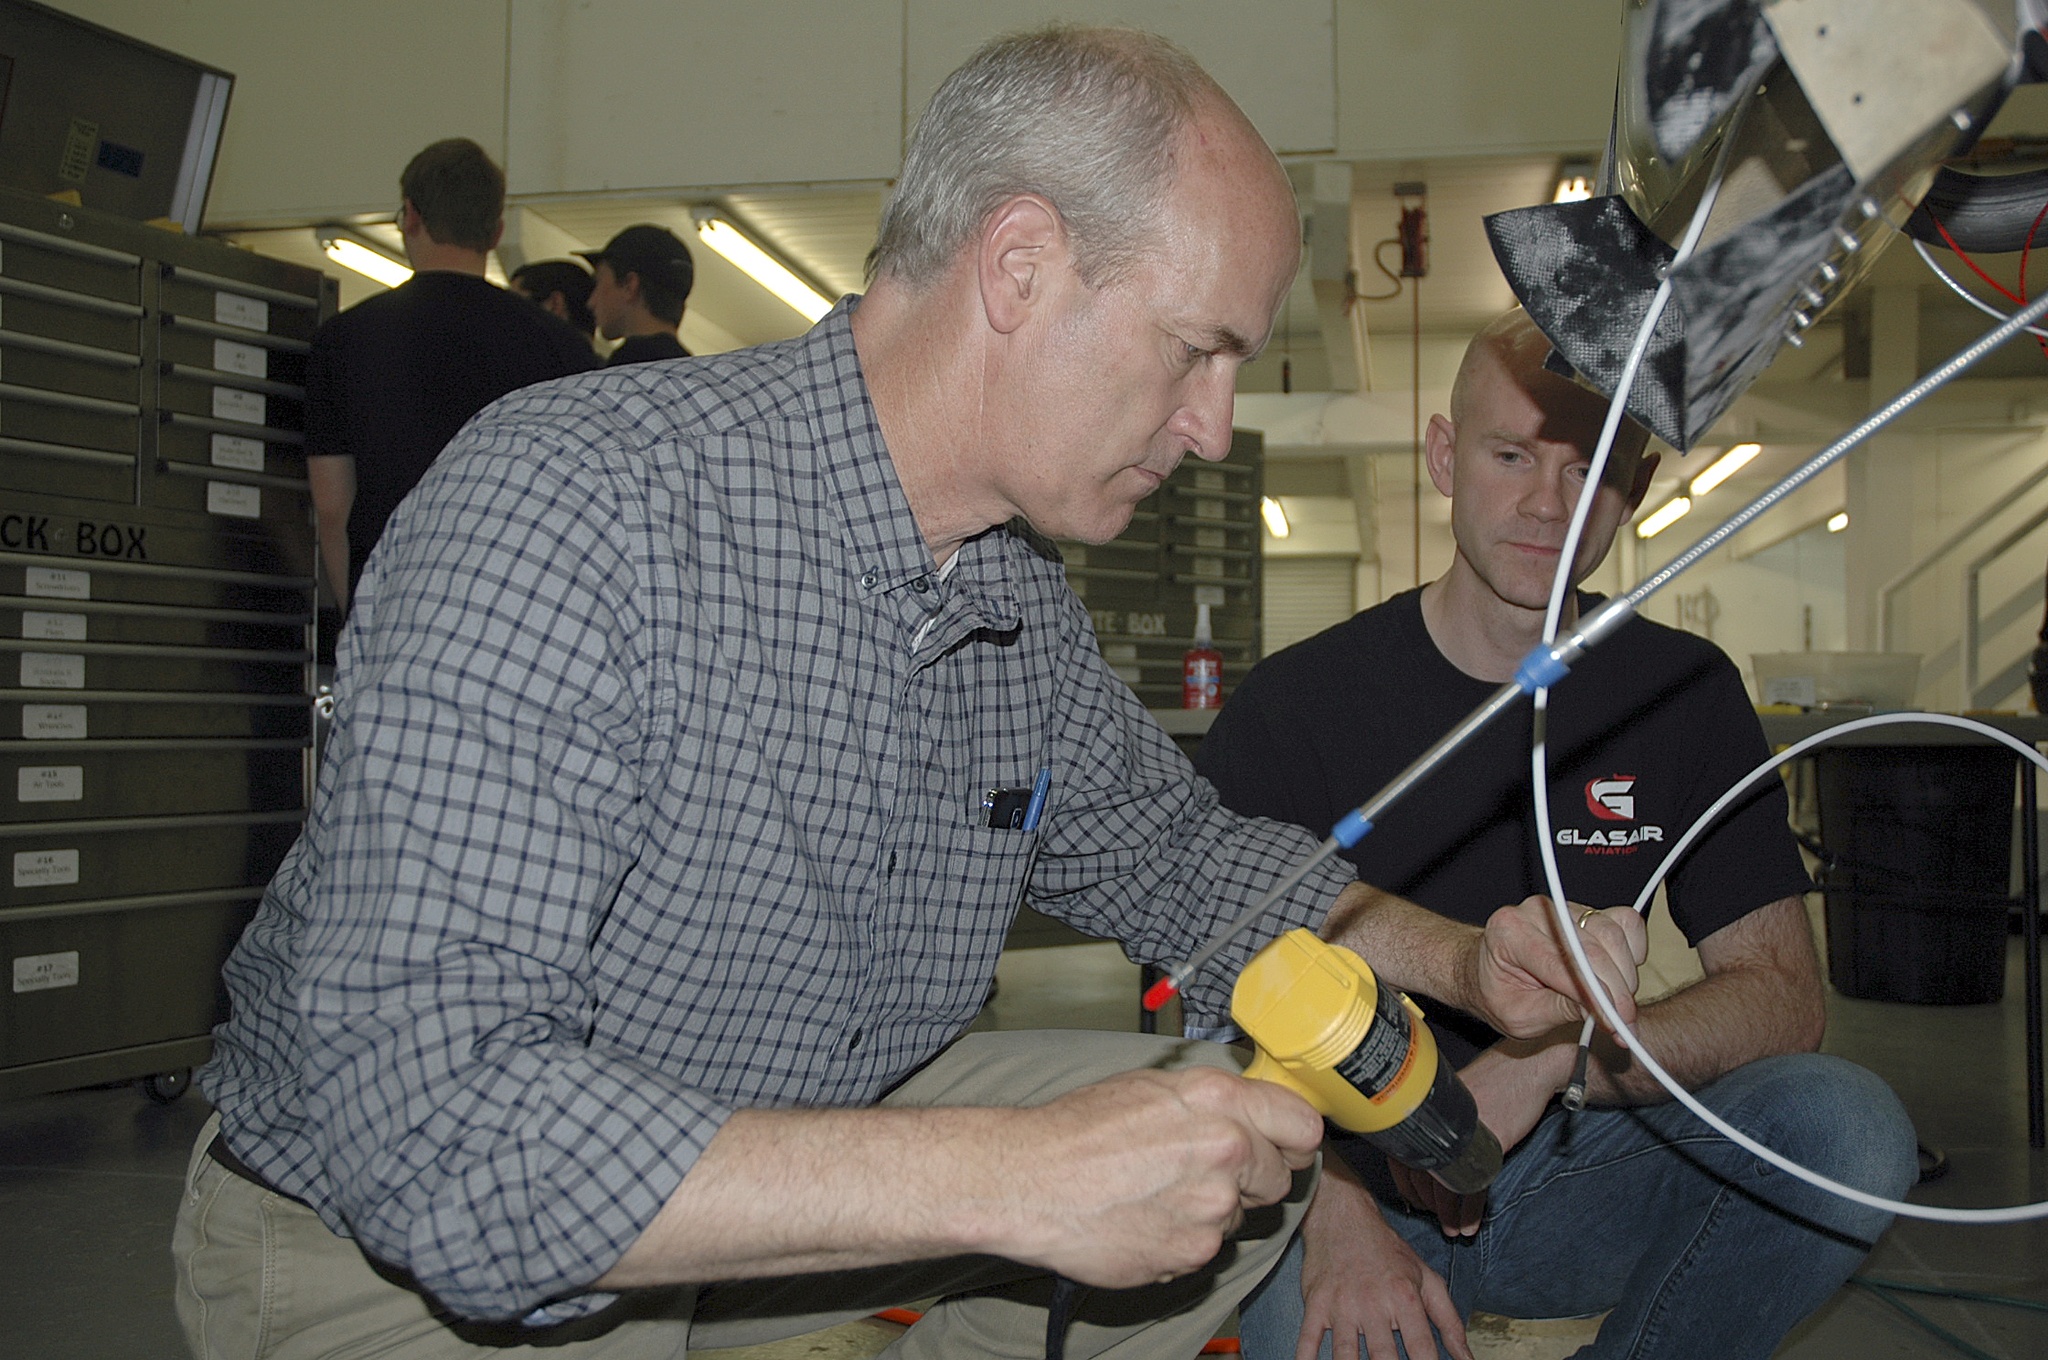 Kirk Boxleitner/Staff PhotoU.S. Rep. Rick Larsen tries his hand at working on a Glasair Sportsman aircraft engine